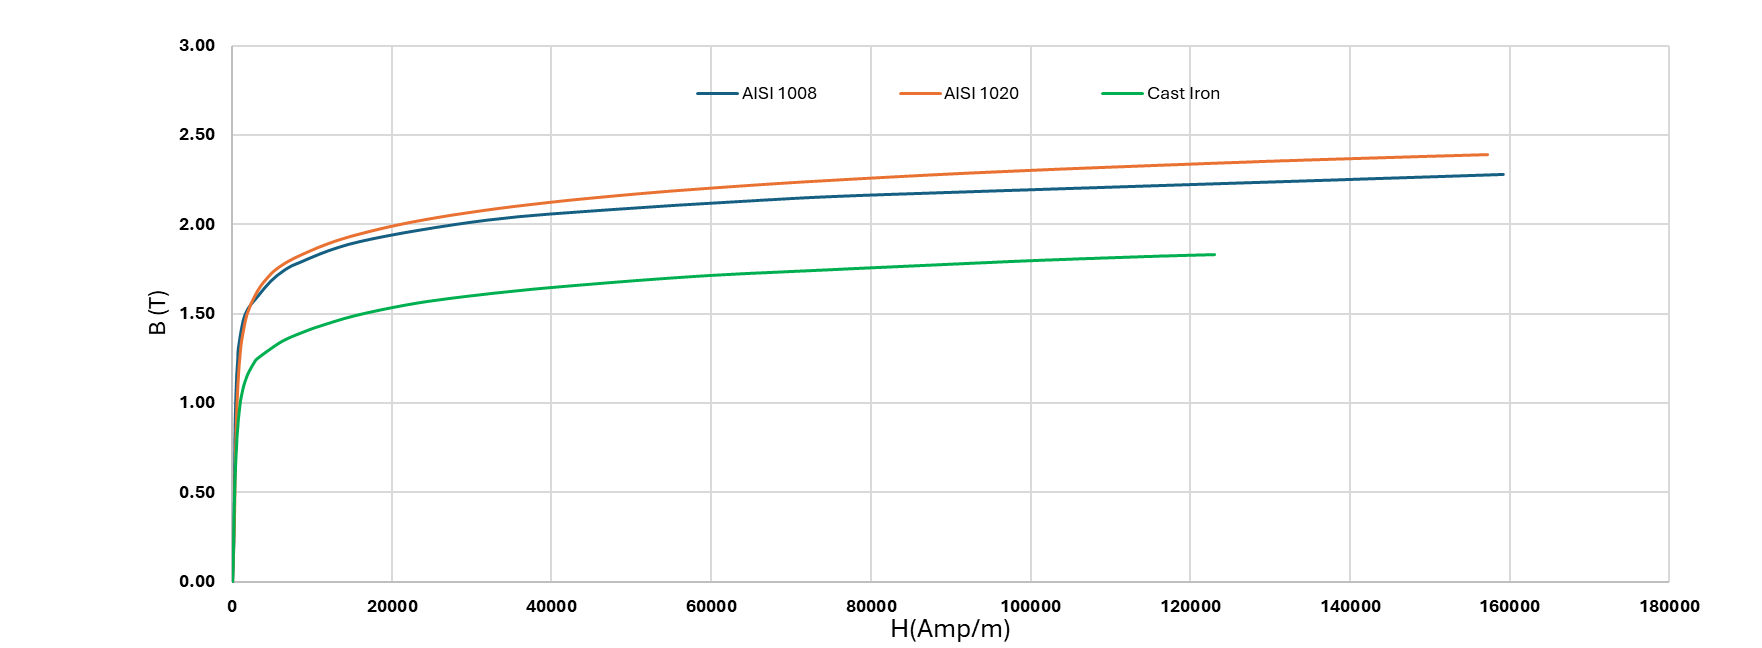 Core BH Curve for Different Steel Grades